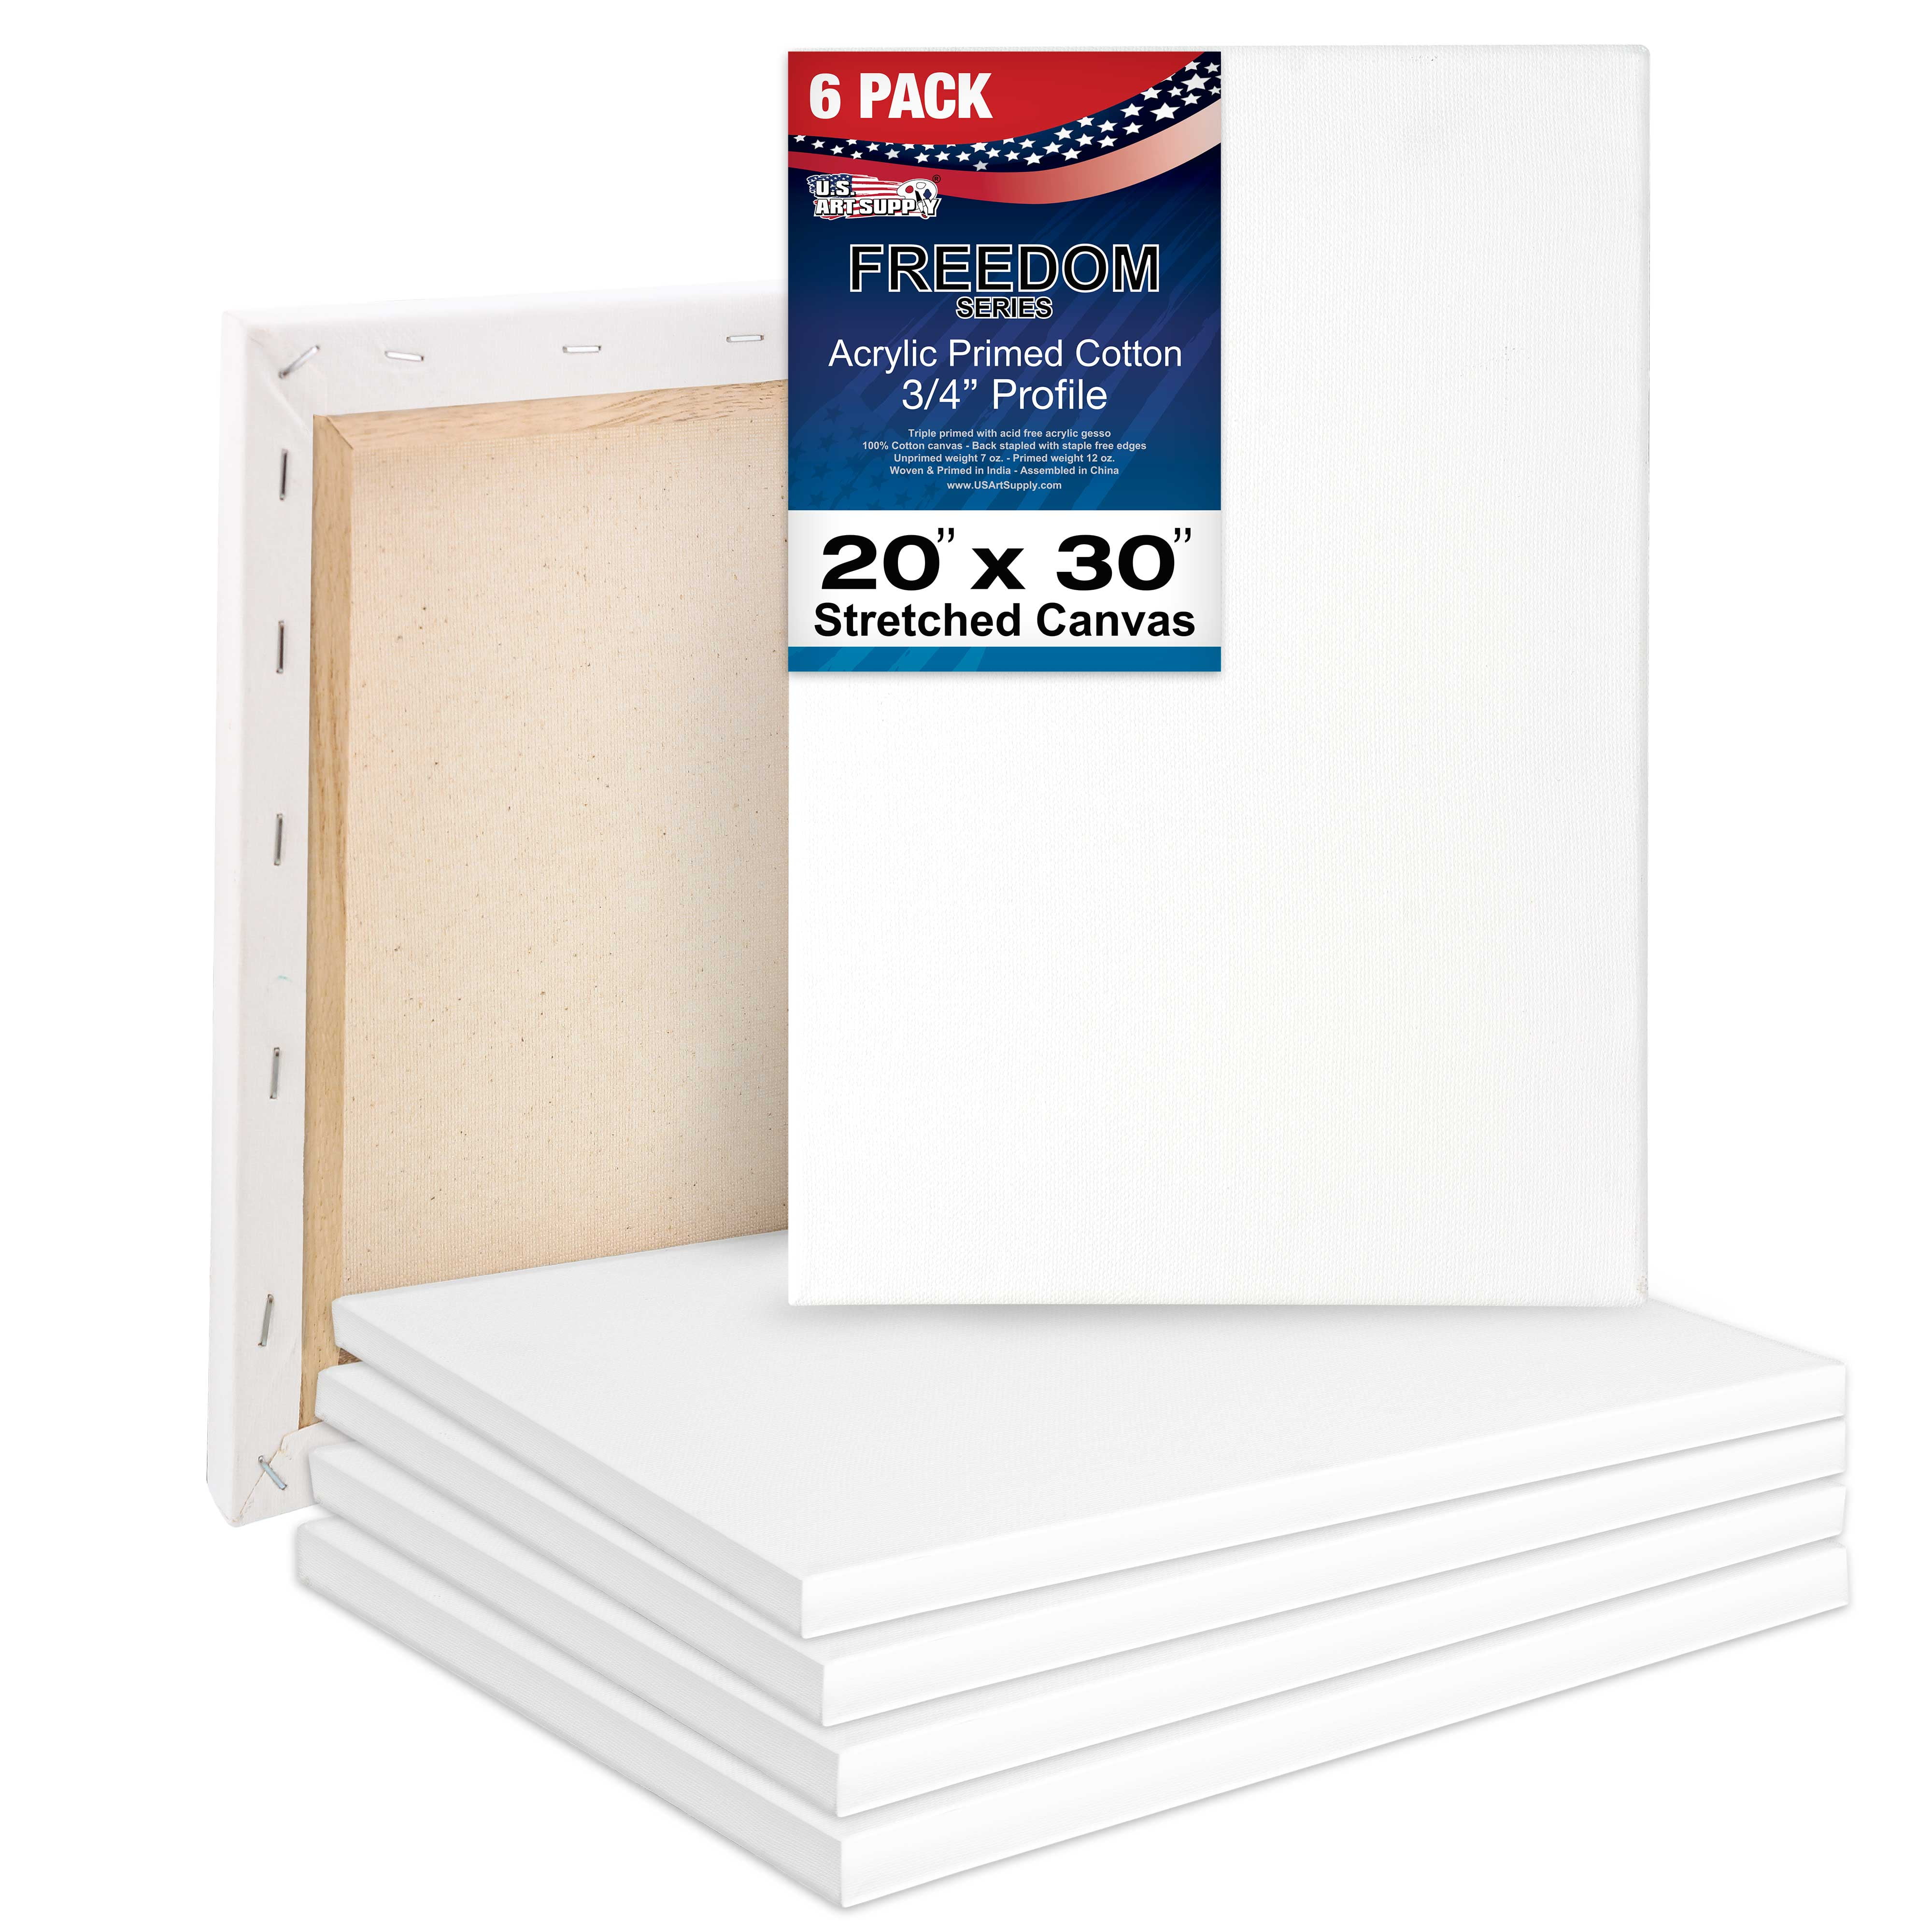 US Art Supply 20 x 30 inch Stretched Canvas 12-Ounce Triple Primed, 6-Pack  - Professional Artist Quality White Blank 3/4 Profile, 100% Cotton